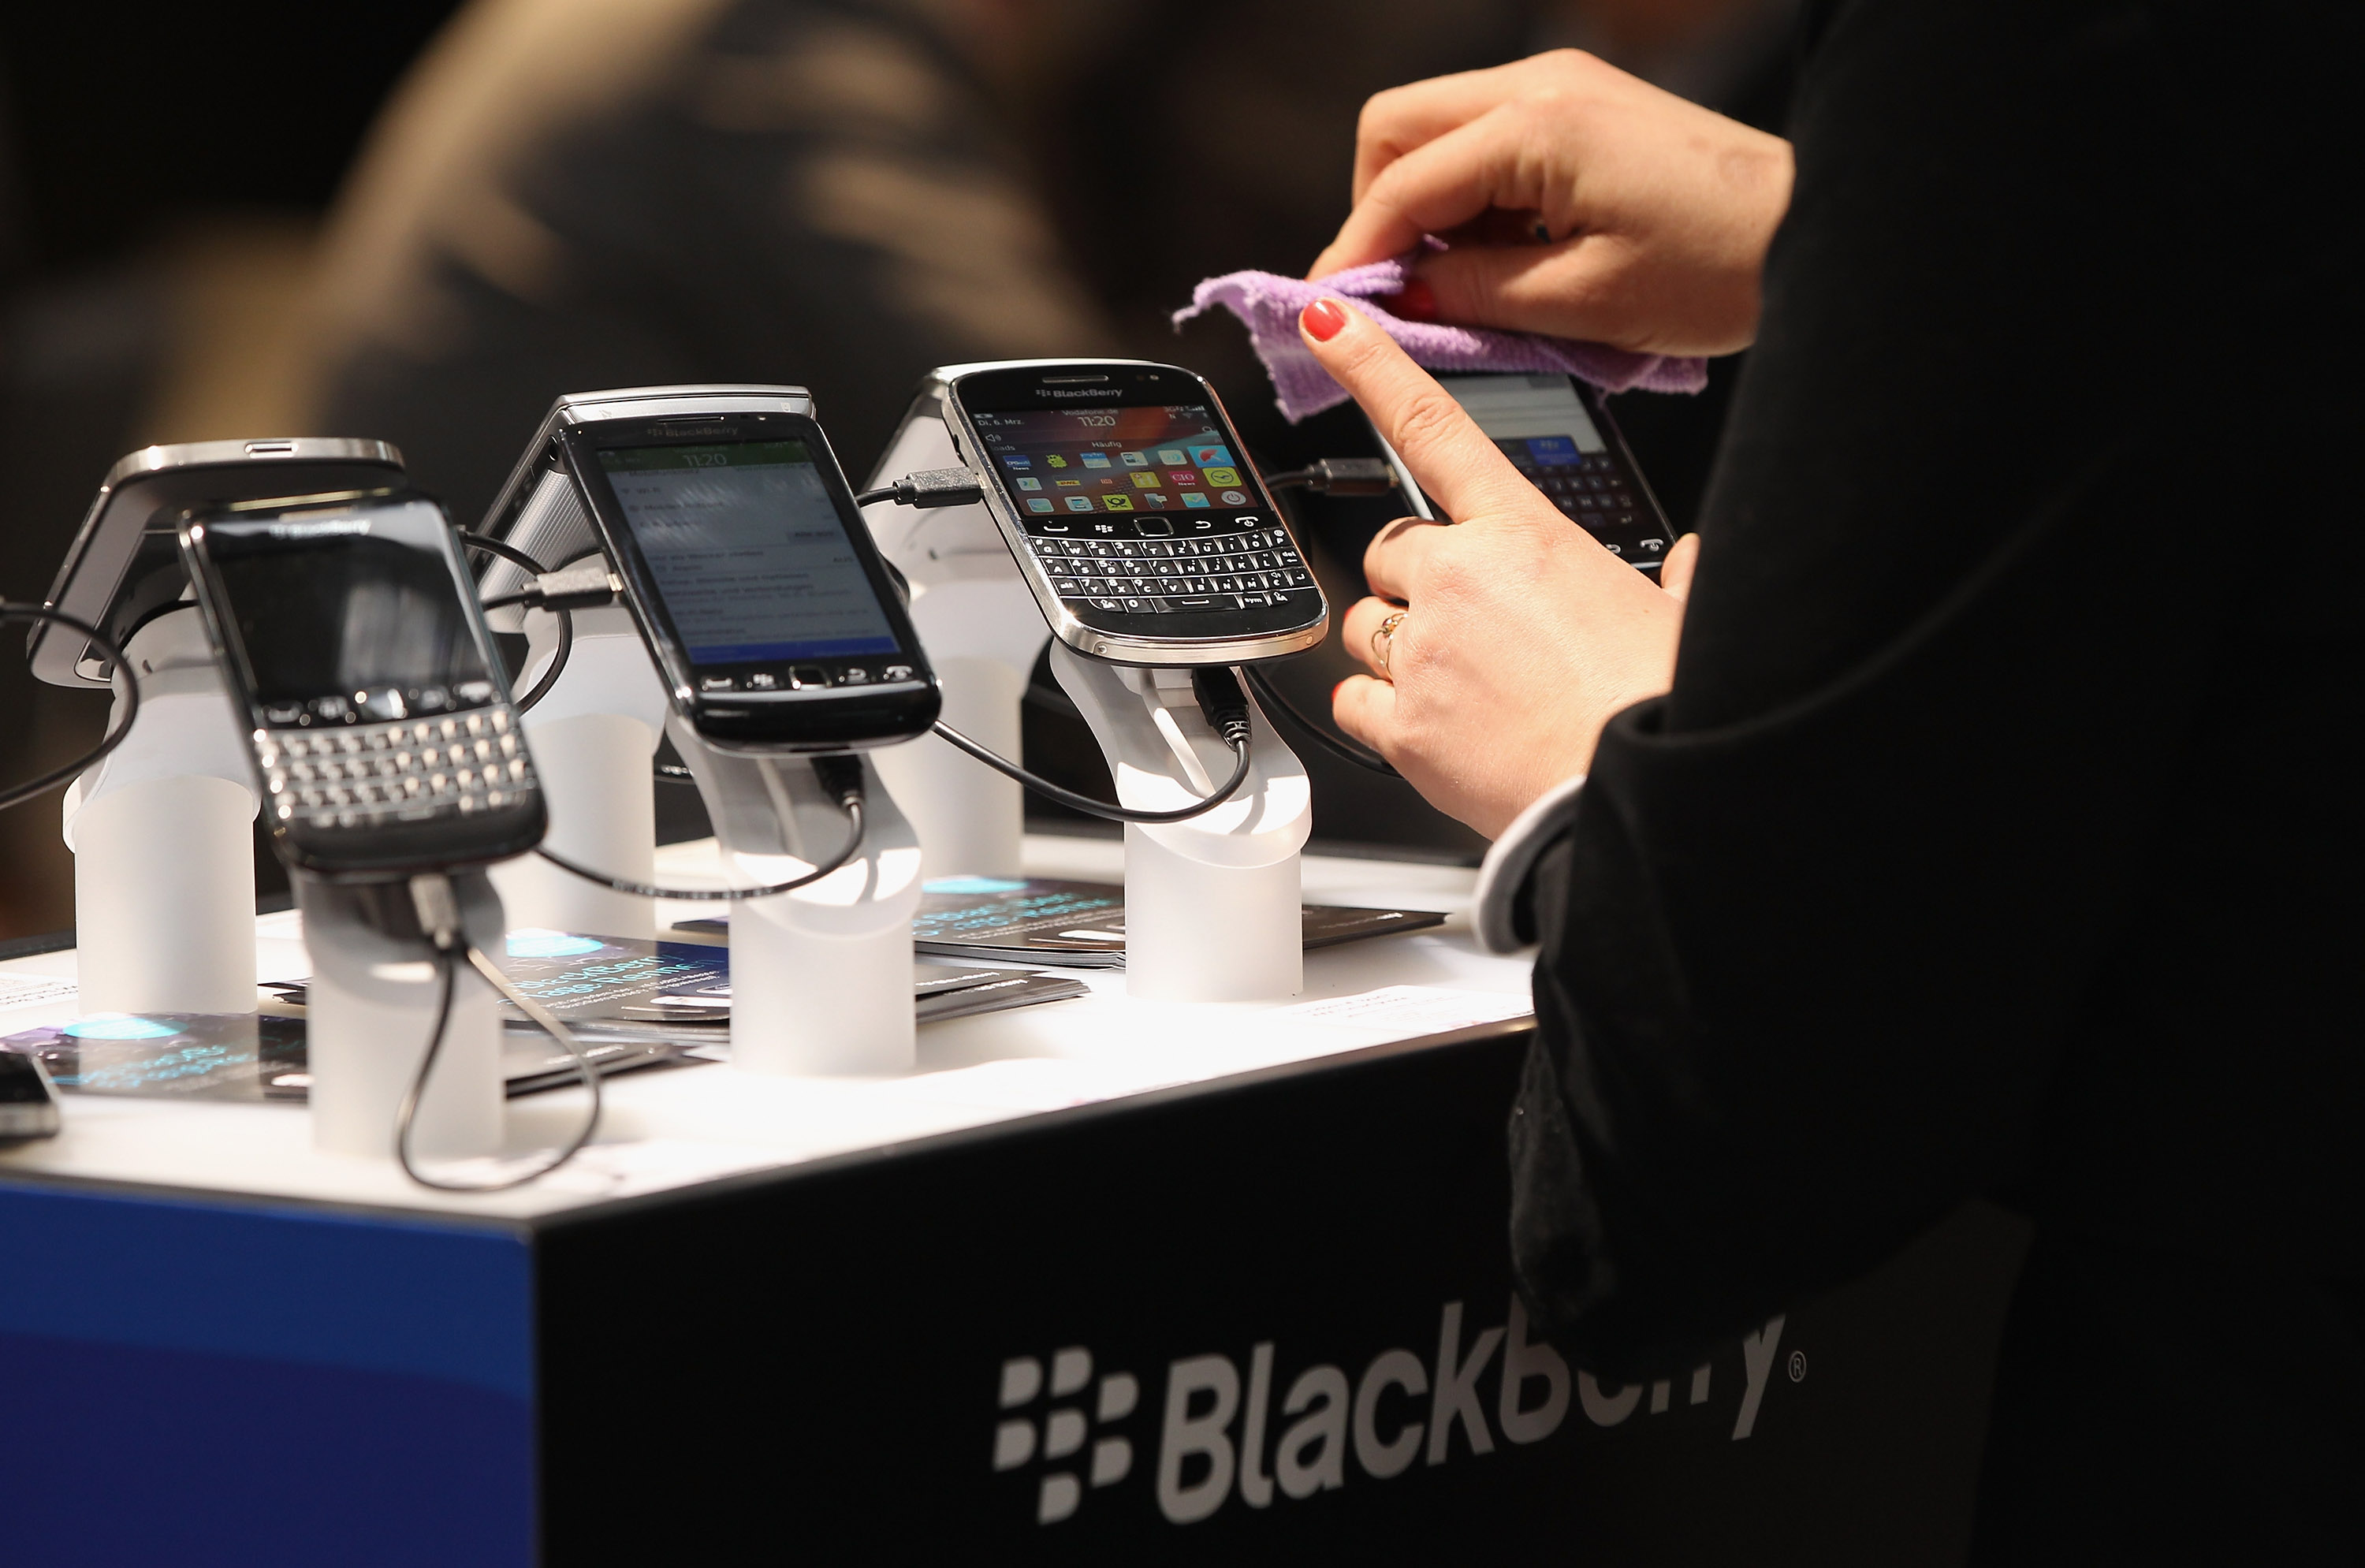 Visitors try out Blackberry smartphones at the Blackberry stand on the first day of the CeBIT 2012 technology trade fair on March 6, 2012 in Hanover, Germany. (Sean Gallup&mdash;Getty Images)